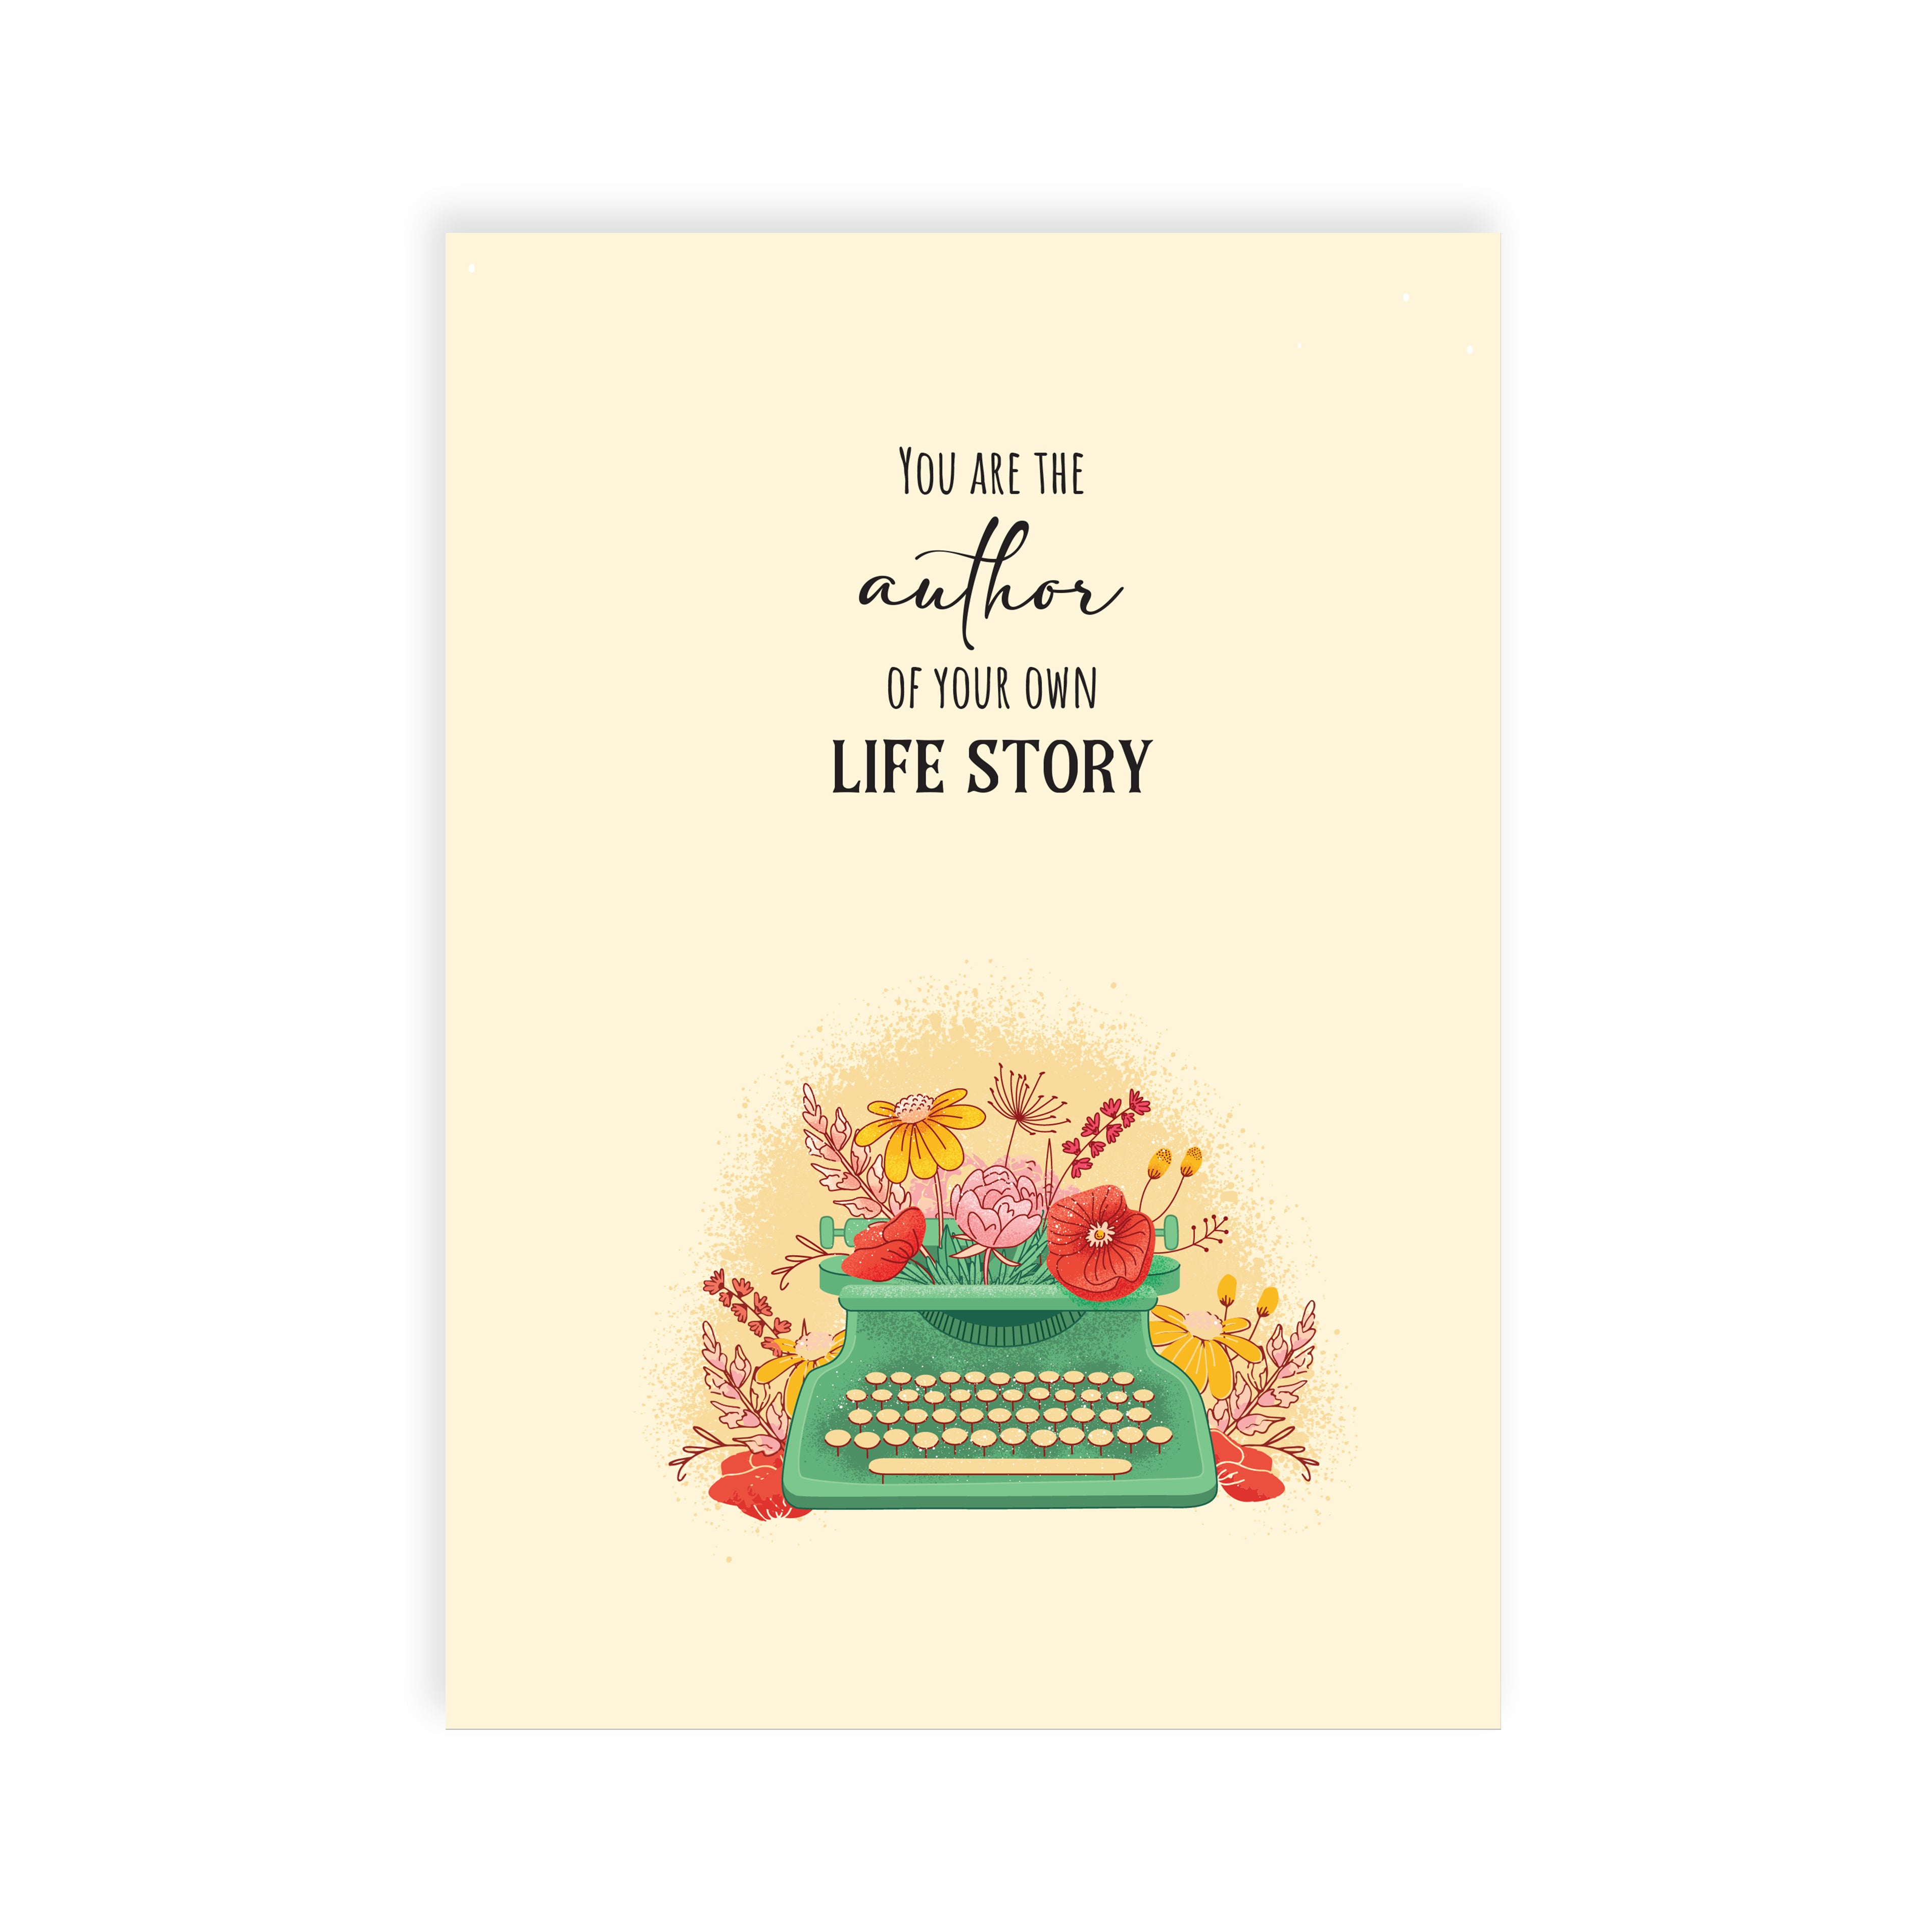 Collectable Notebook You Are The Author Of Your Own Life story Ruled A5 90gsm 64pages 1Book